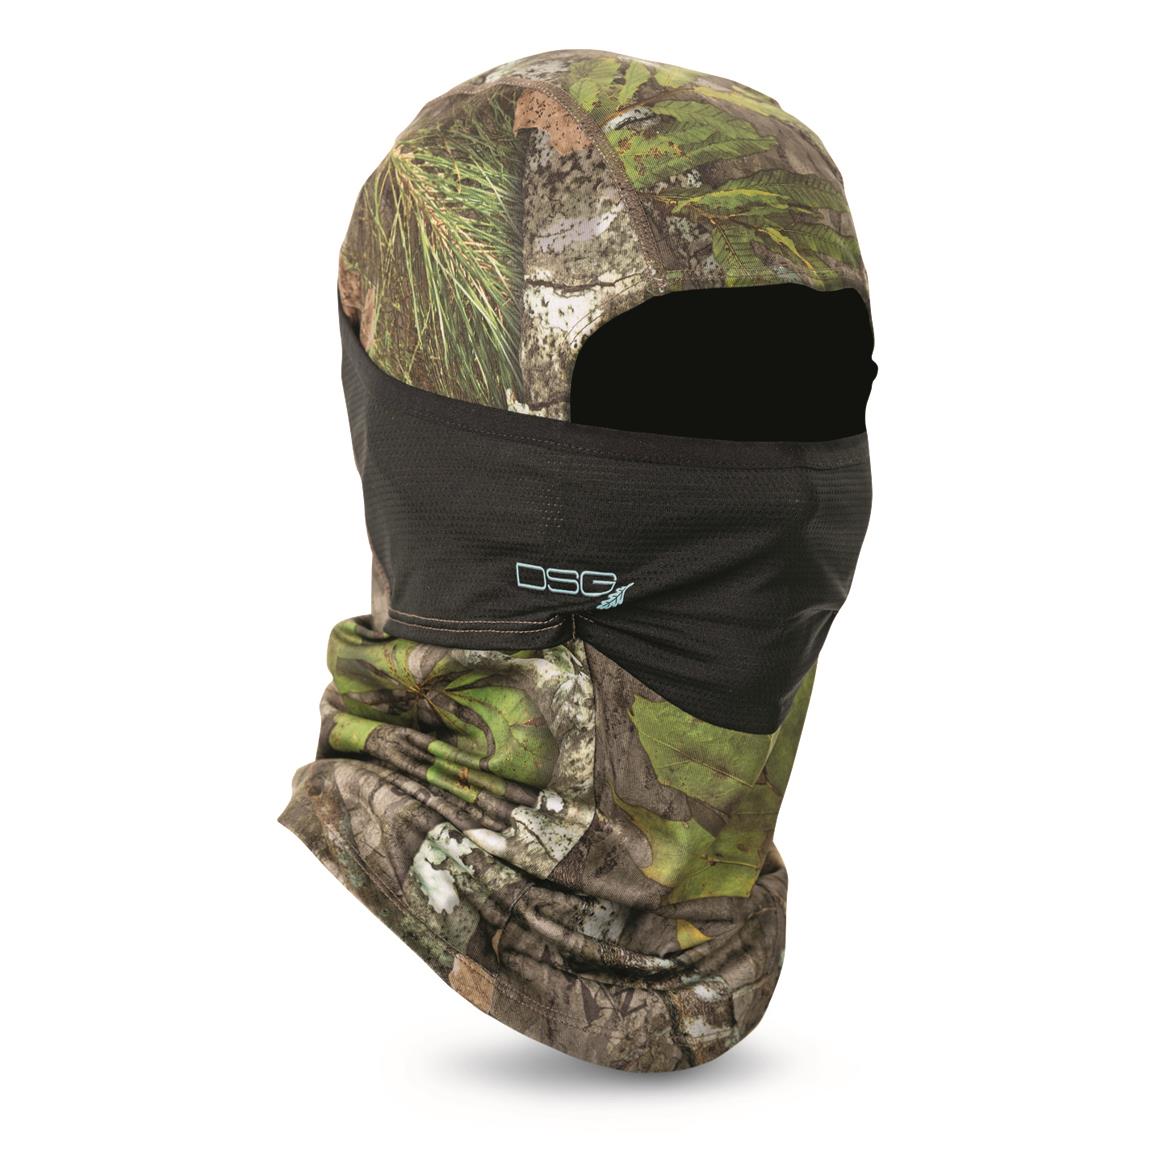 DSG Outerwear Women's Balaclava with Mesh Facemask, Mossy Oak Obsession®